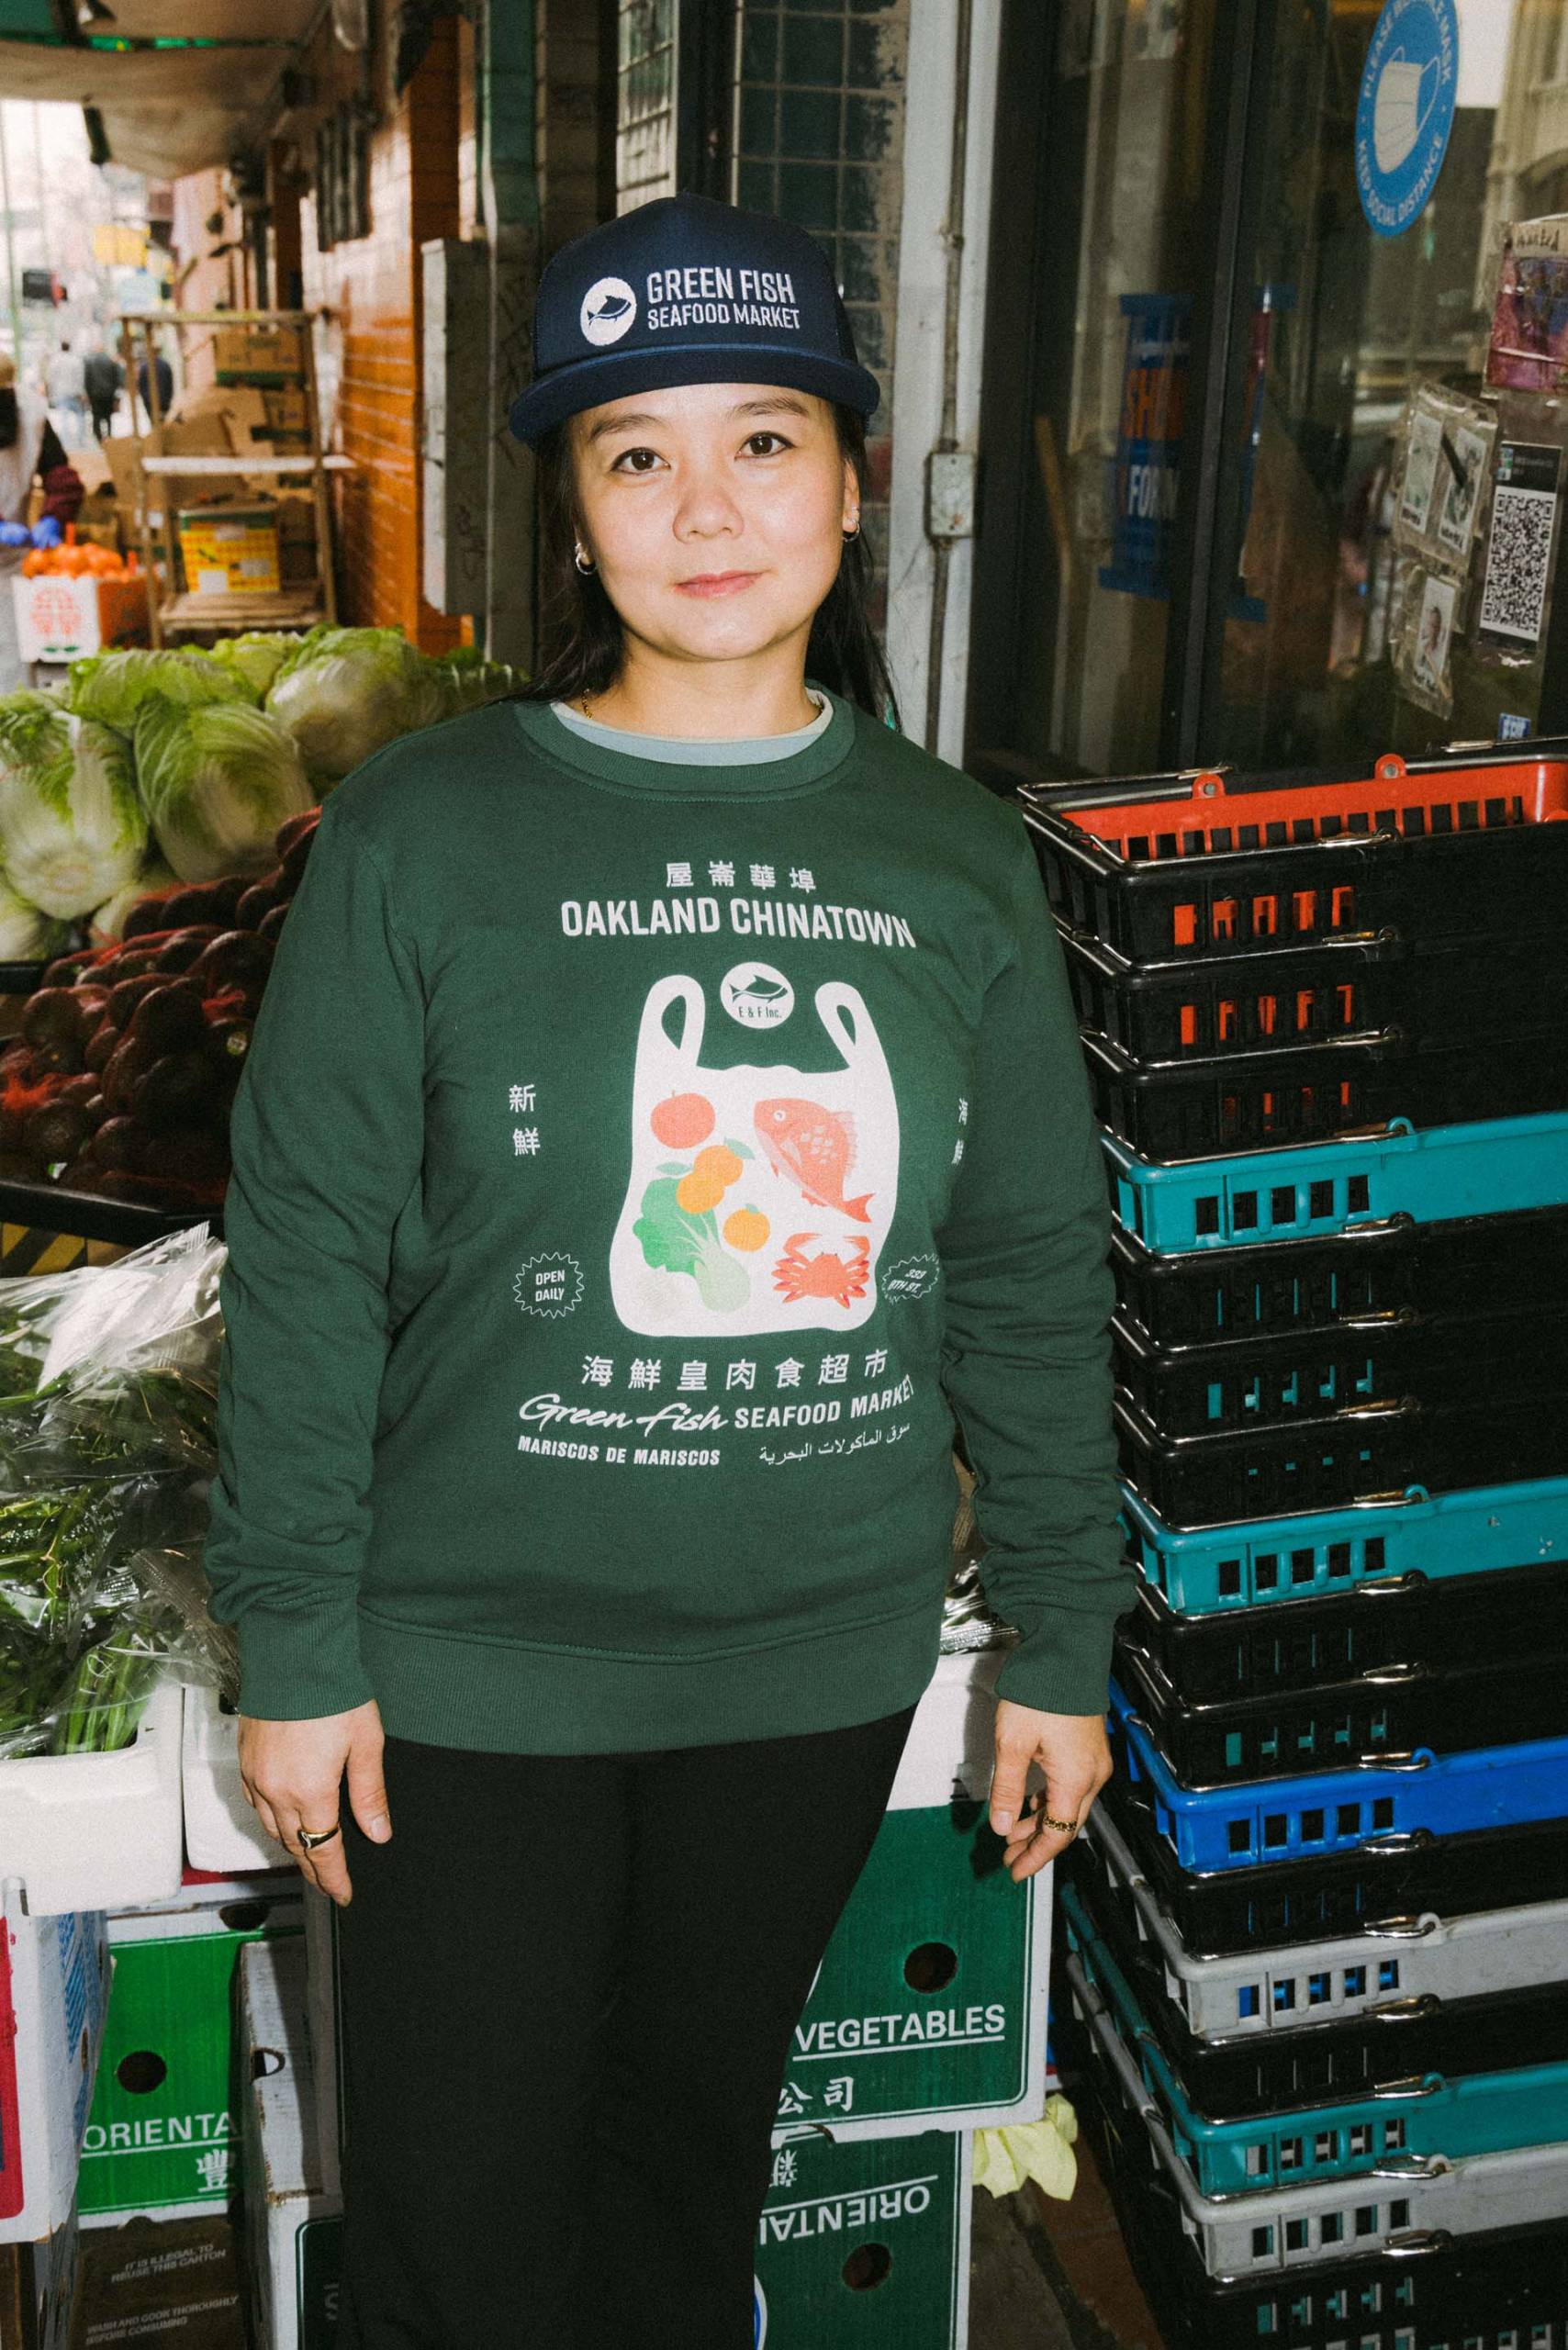 Woman poses in a trucker hat and a green sweatshirt, both promoting her business, Green Fish Seafood Market.